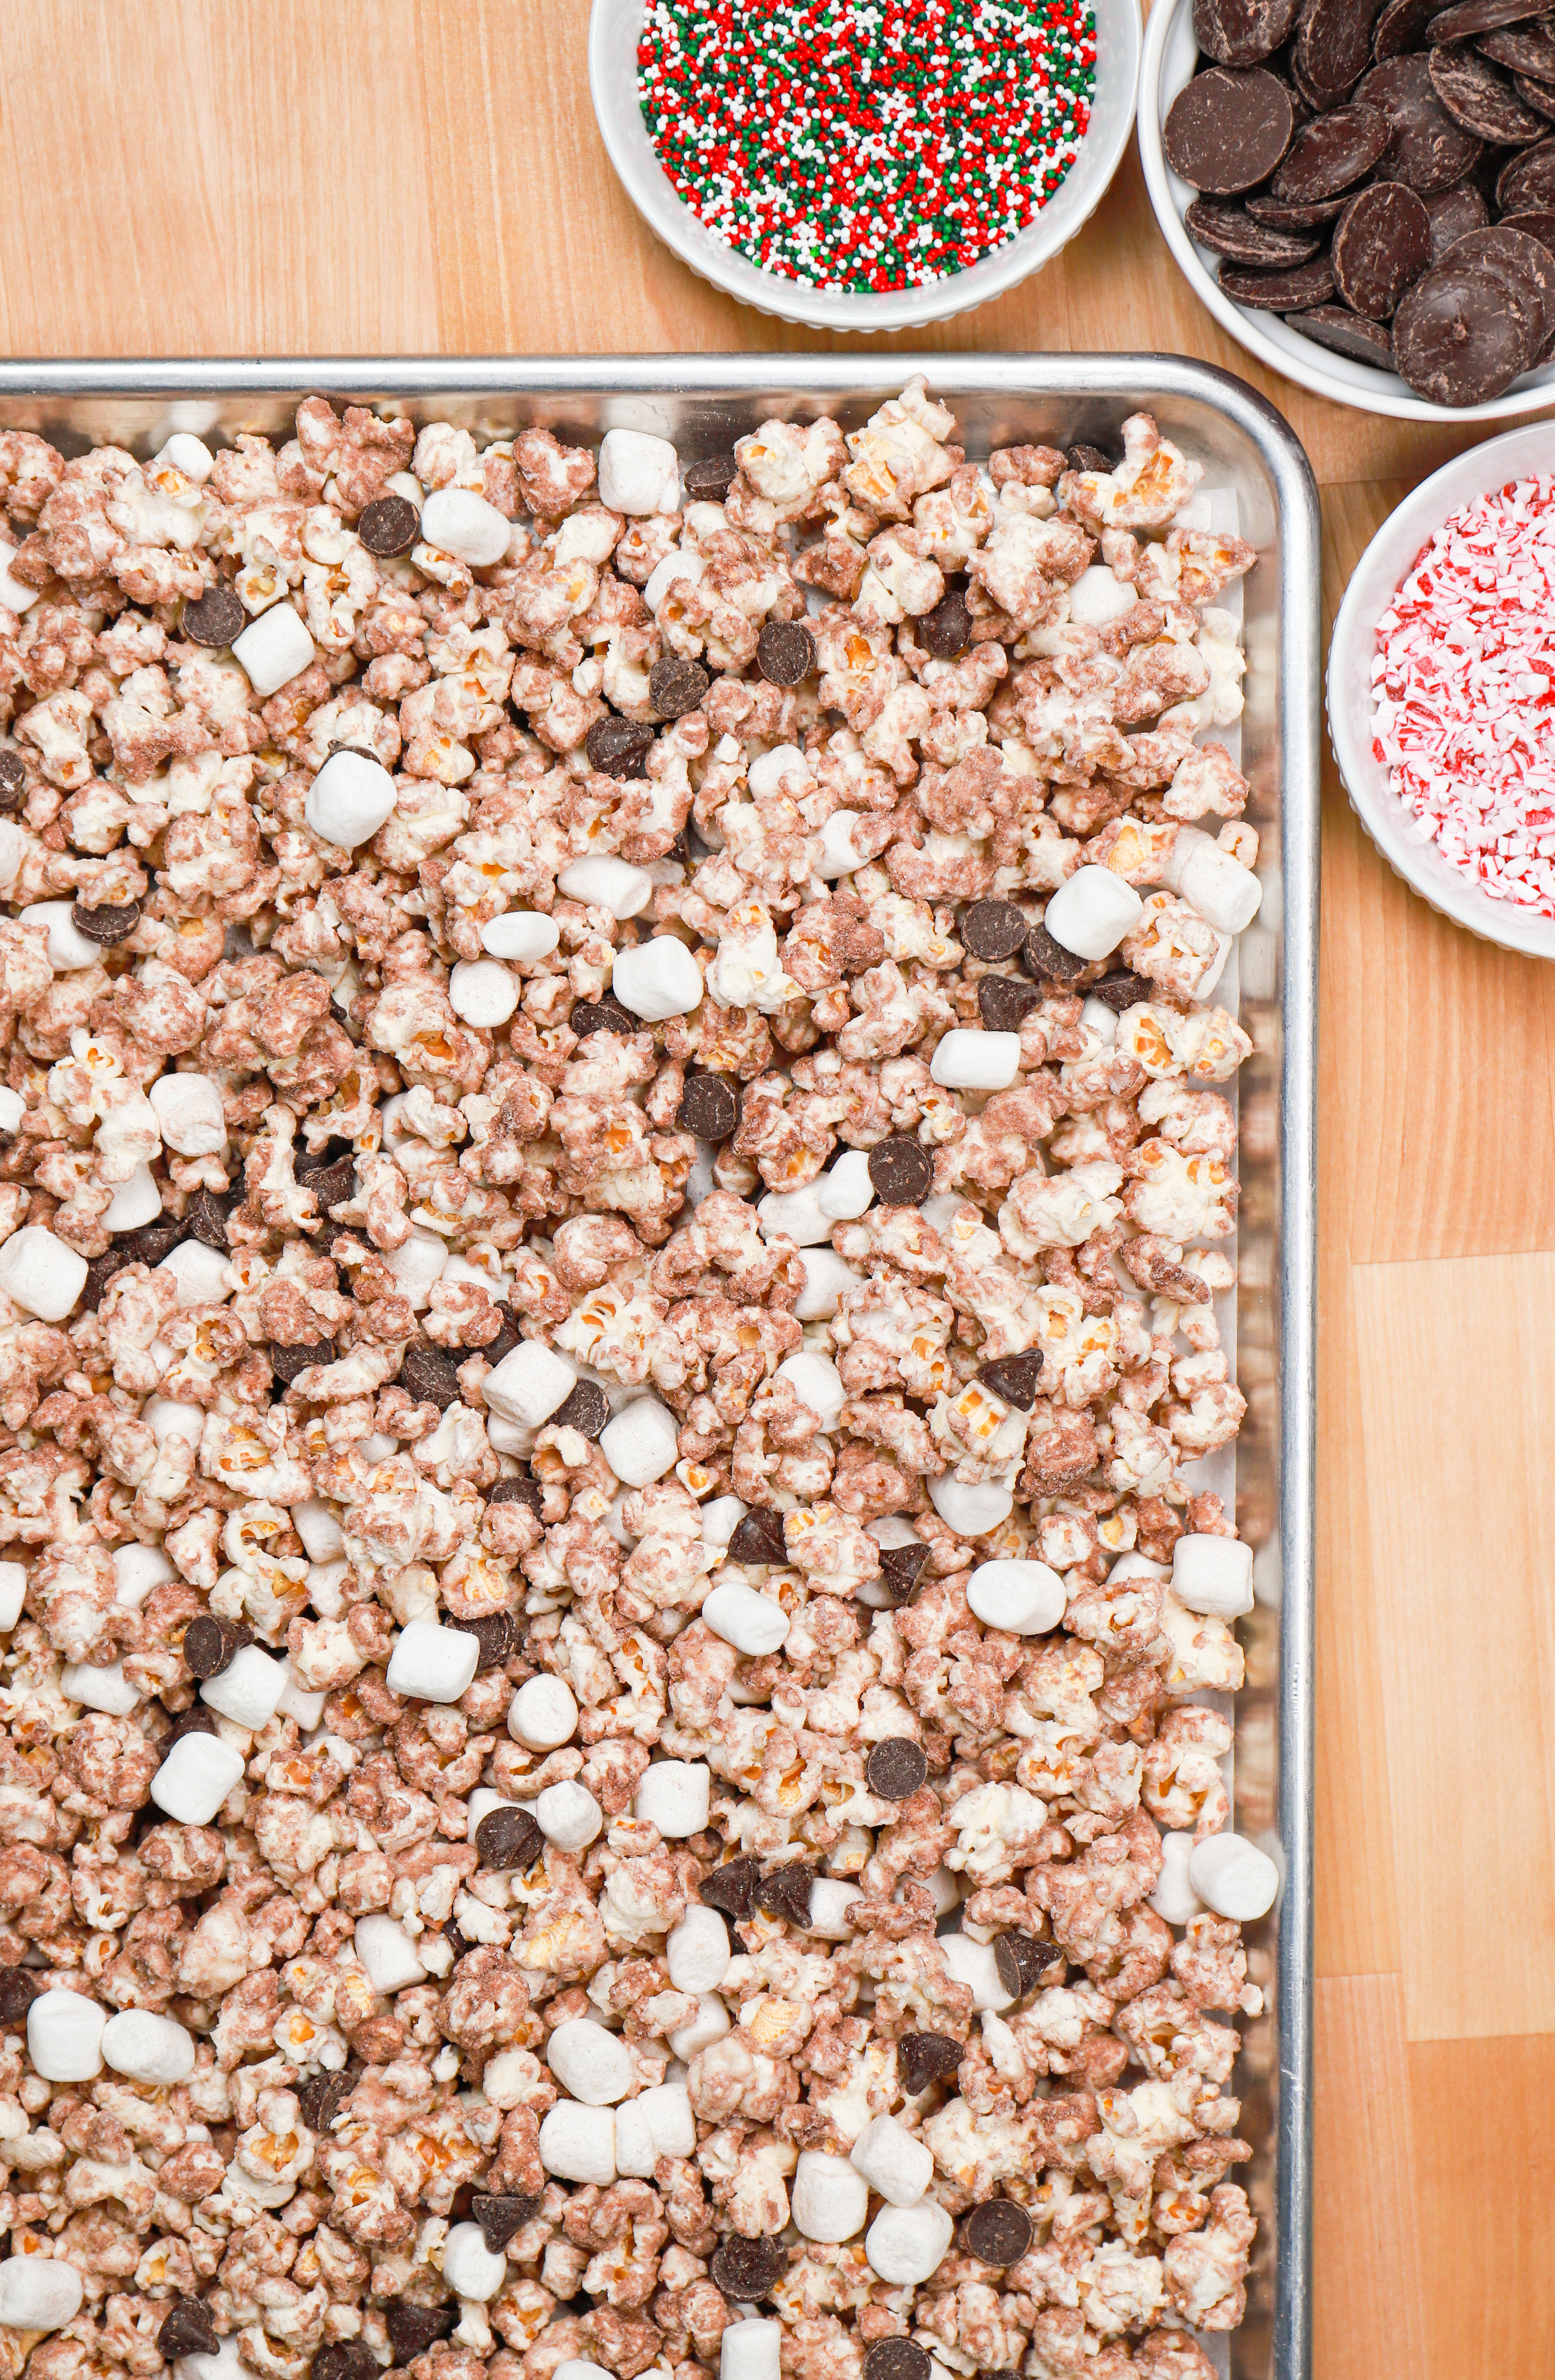 Overhead view of hot chocolate popcorn on a rimmed baking sheet before adding toppings.